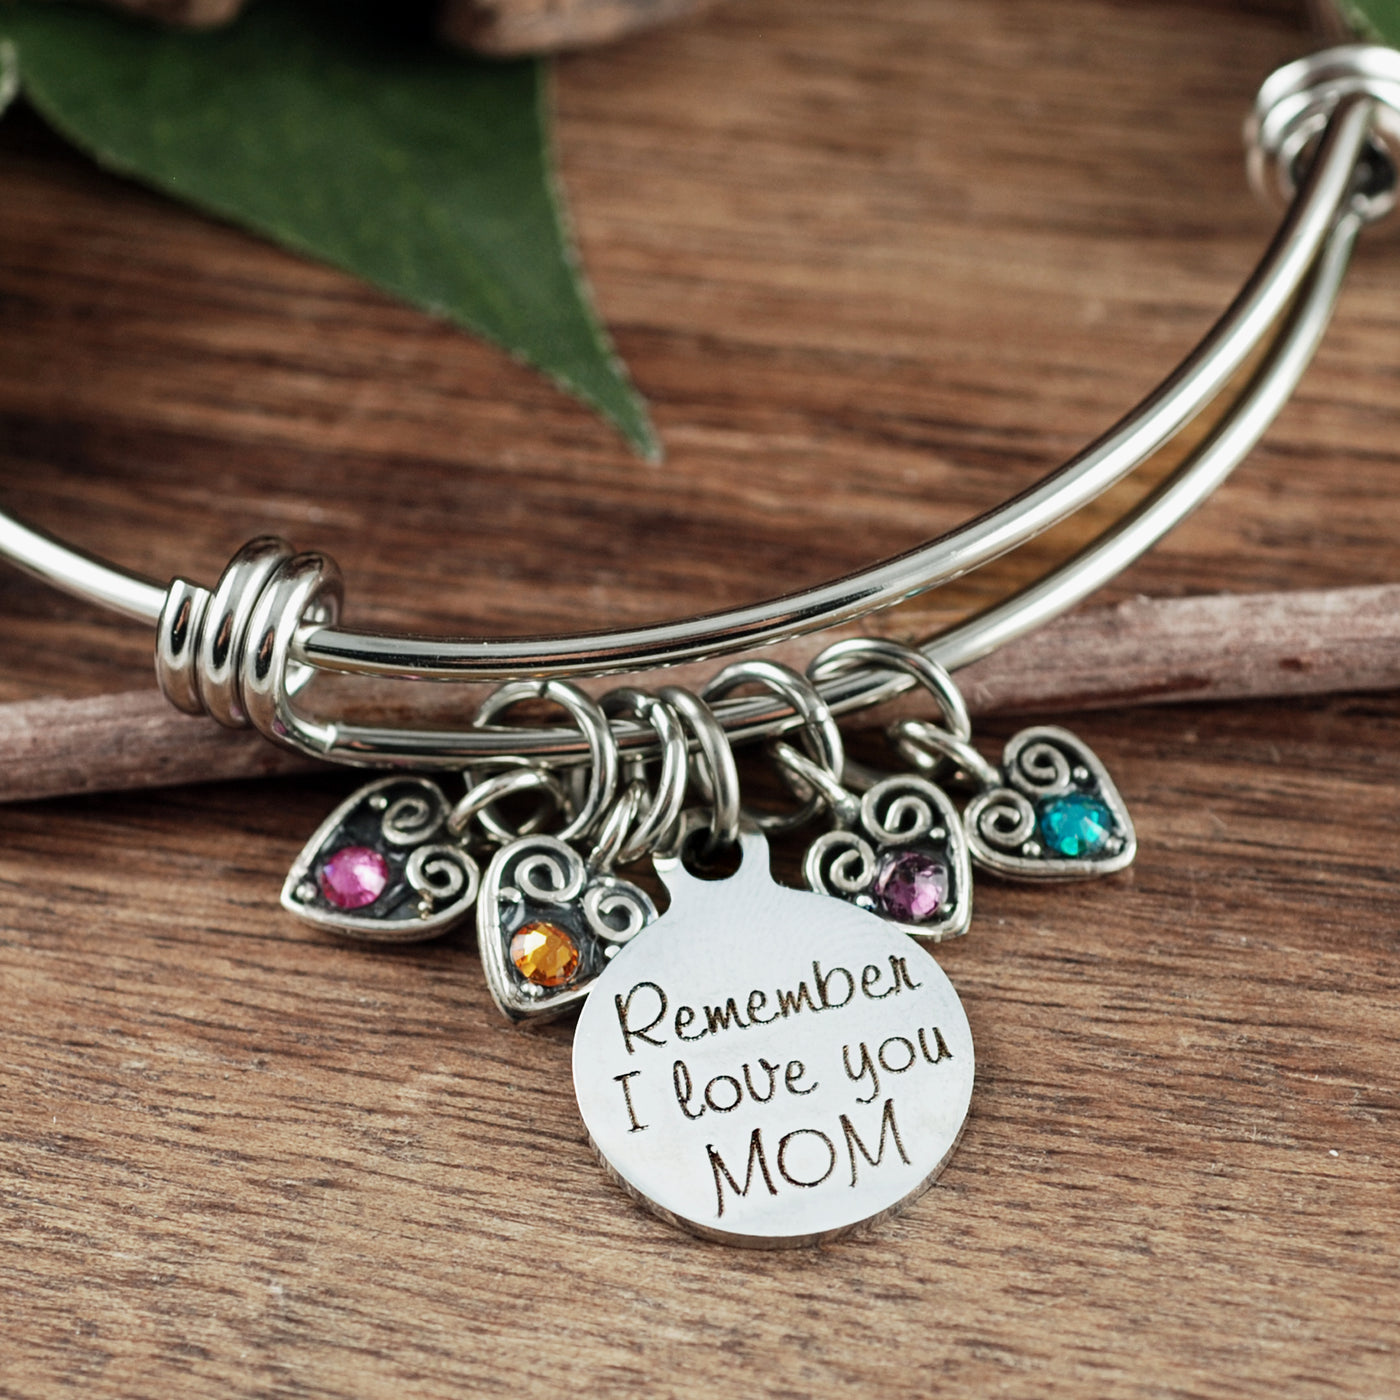 Mom Bracelet With Heart Charms in 925 Sterling Silver | JOYAMO -  Personalized Jewelry